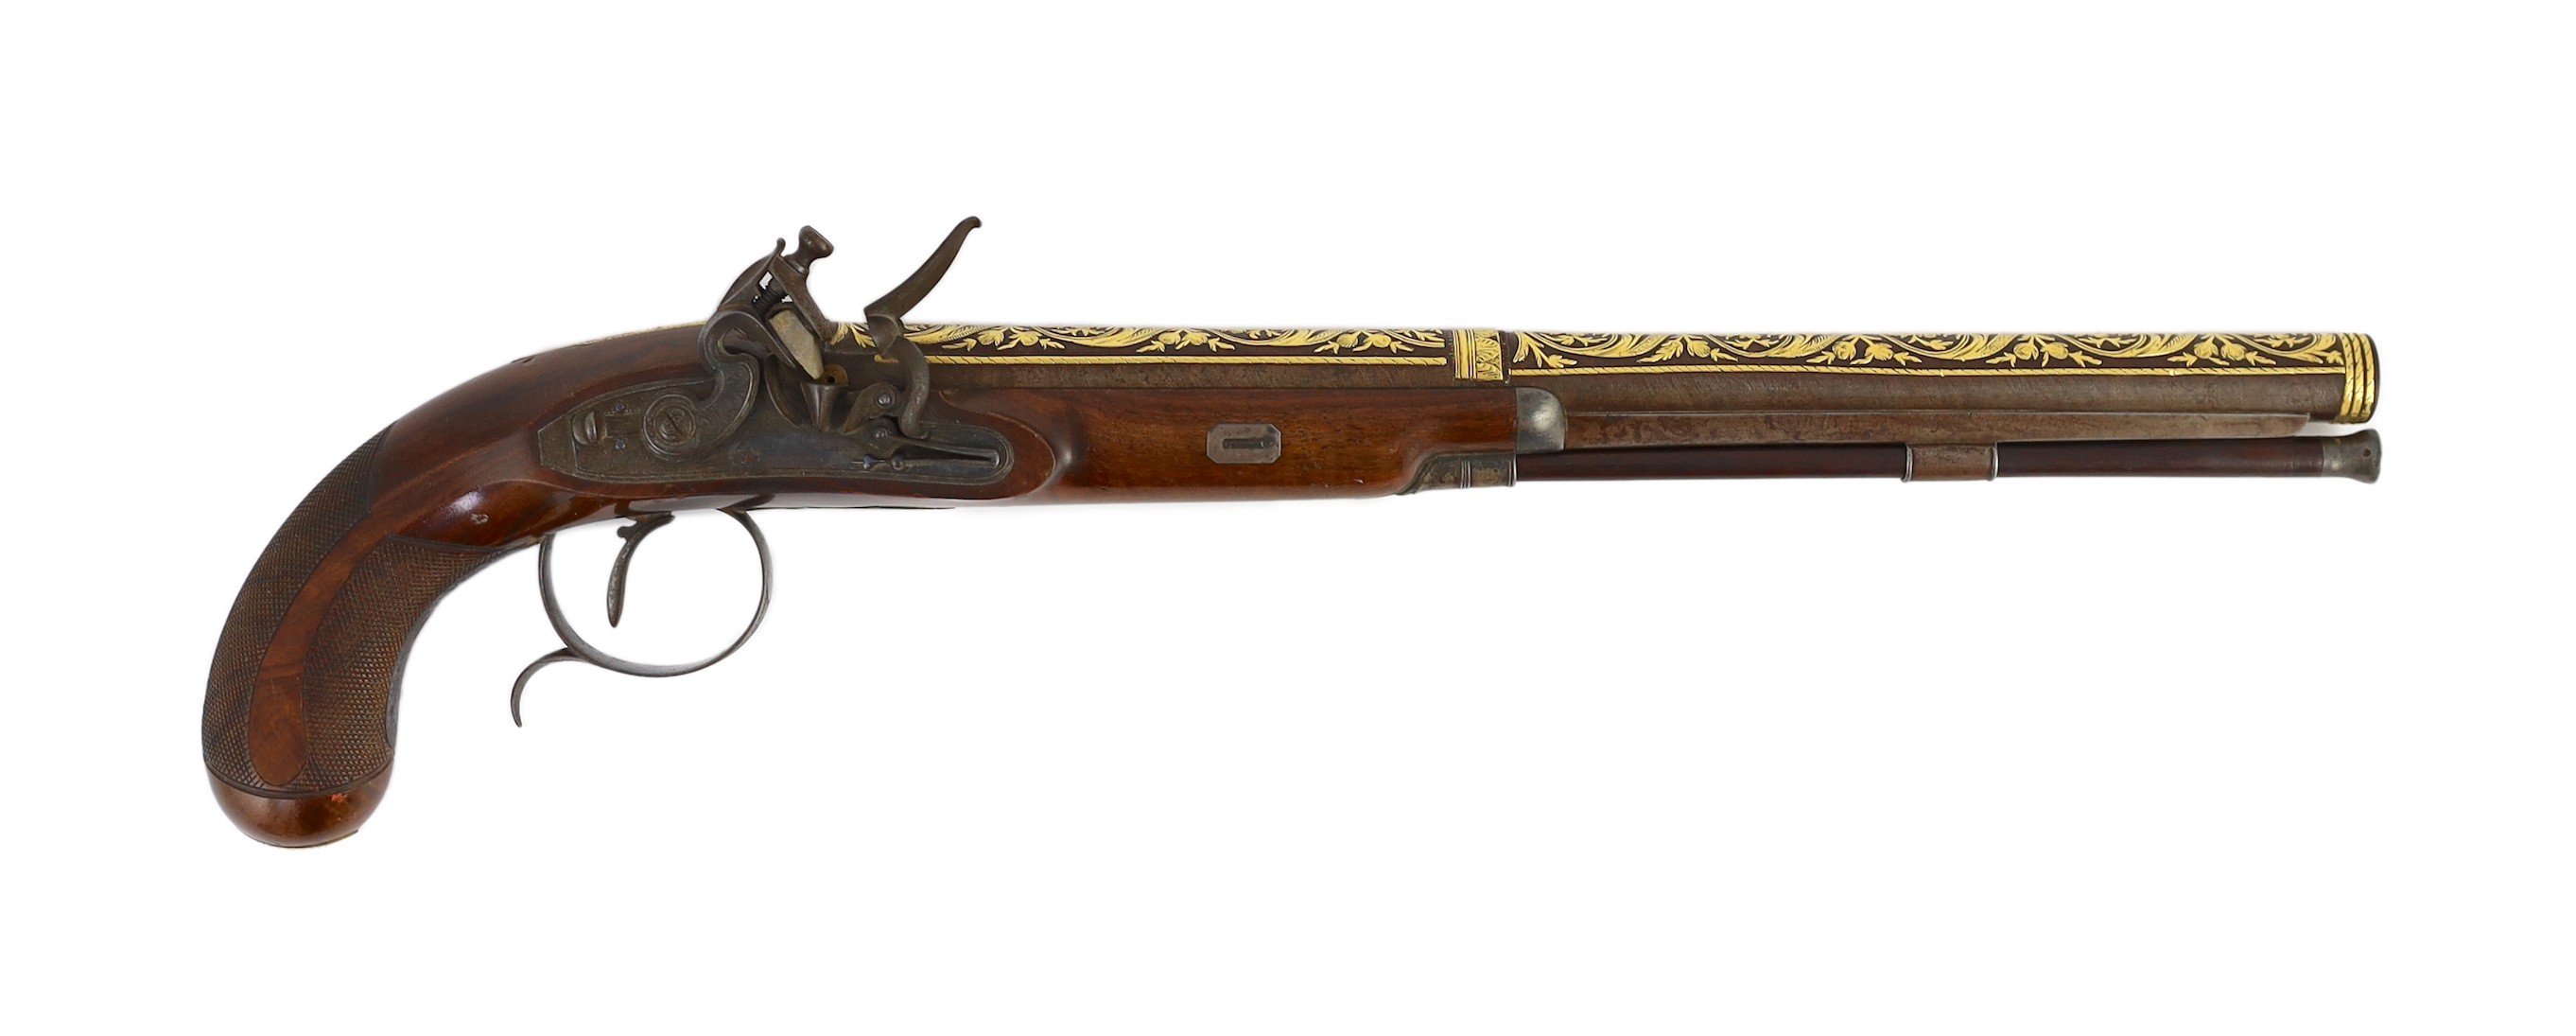 An early 19th century gold overlaid flintlock pistol, by Beckwith, London, 47cm